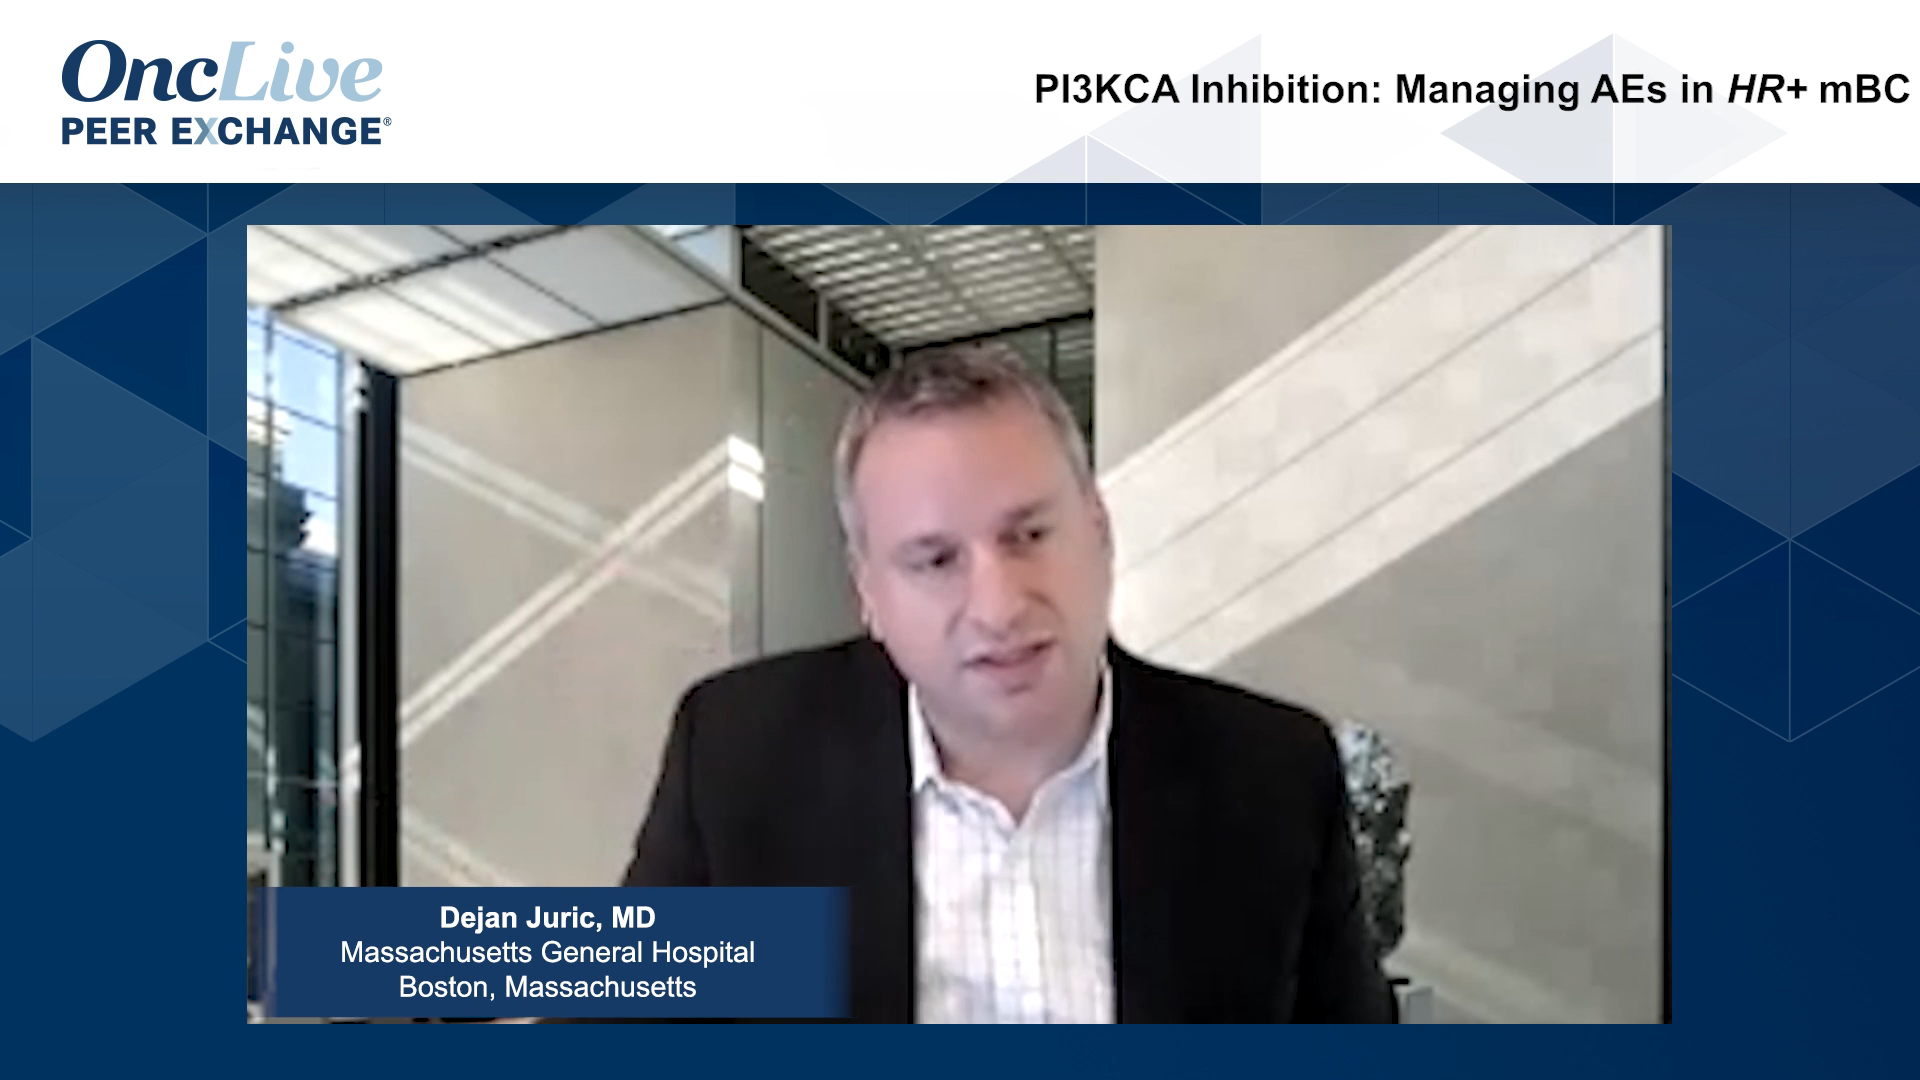 PI3KCA Inhibition: Managing AEs in HR+ mBC